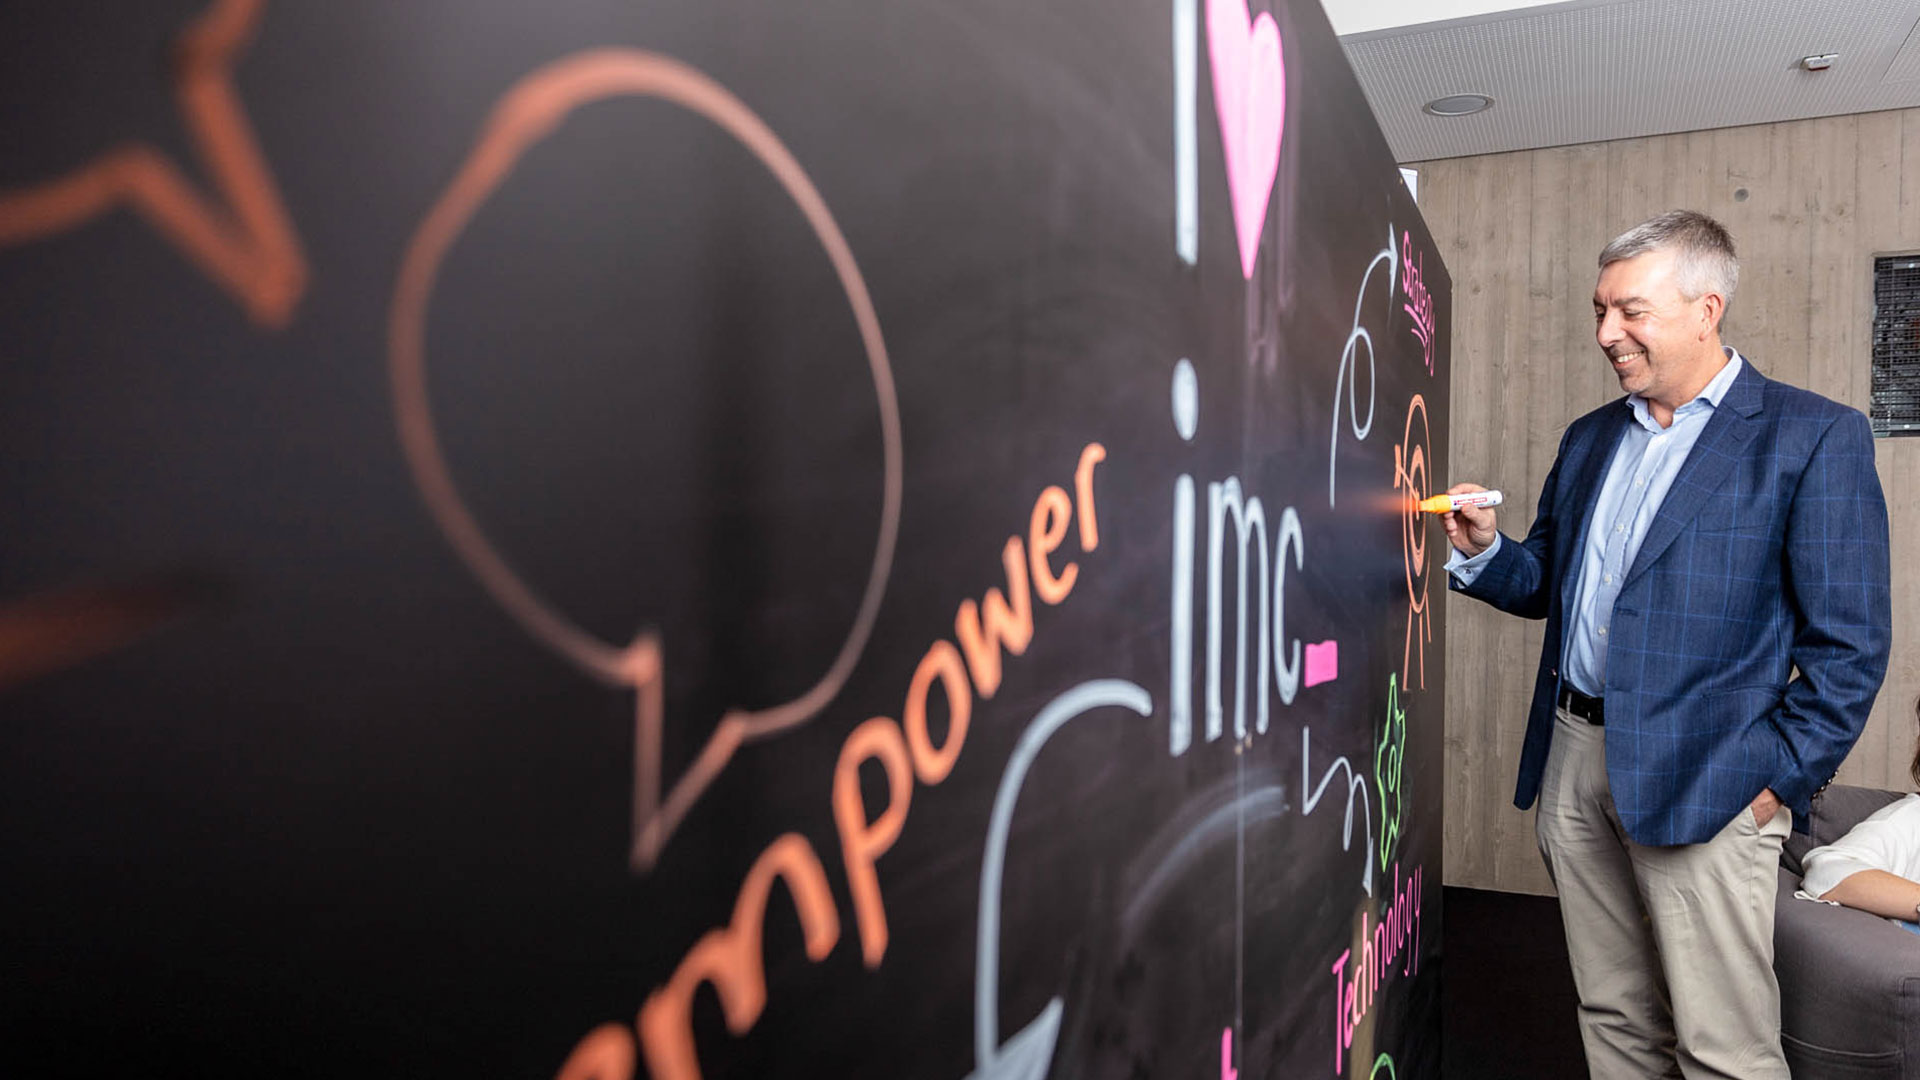 imc employee creating innovative solutions on wall with colourful marker